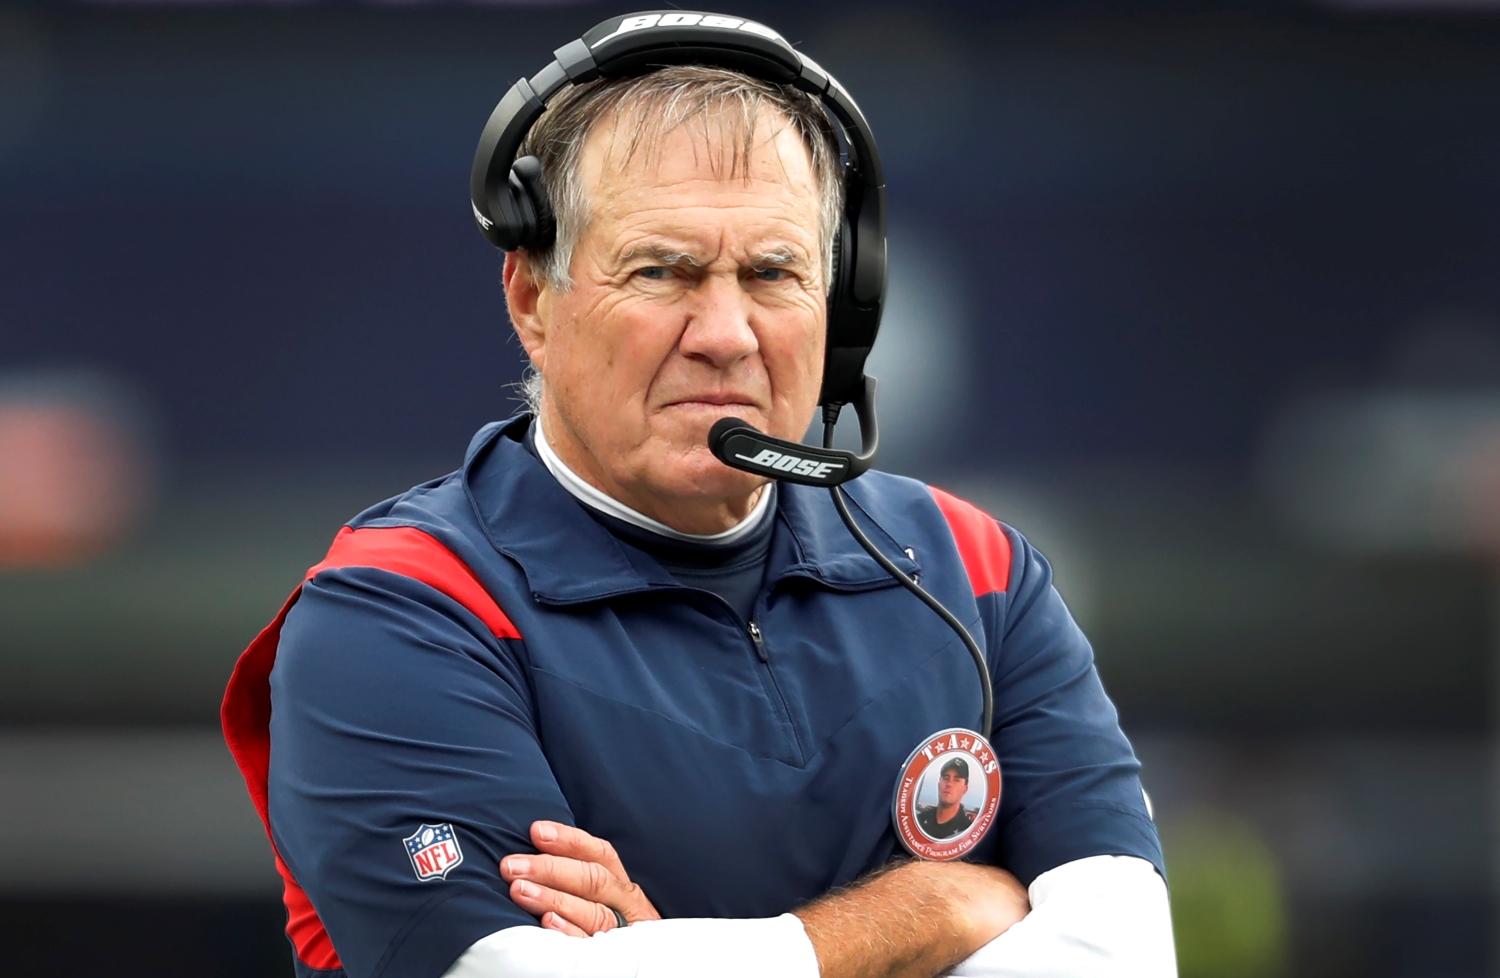 New England Patriots head coach Bill Belichick watches his team with his arms crossed.